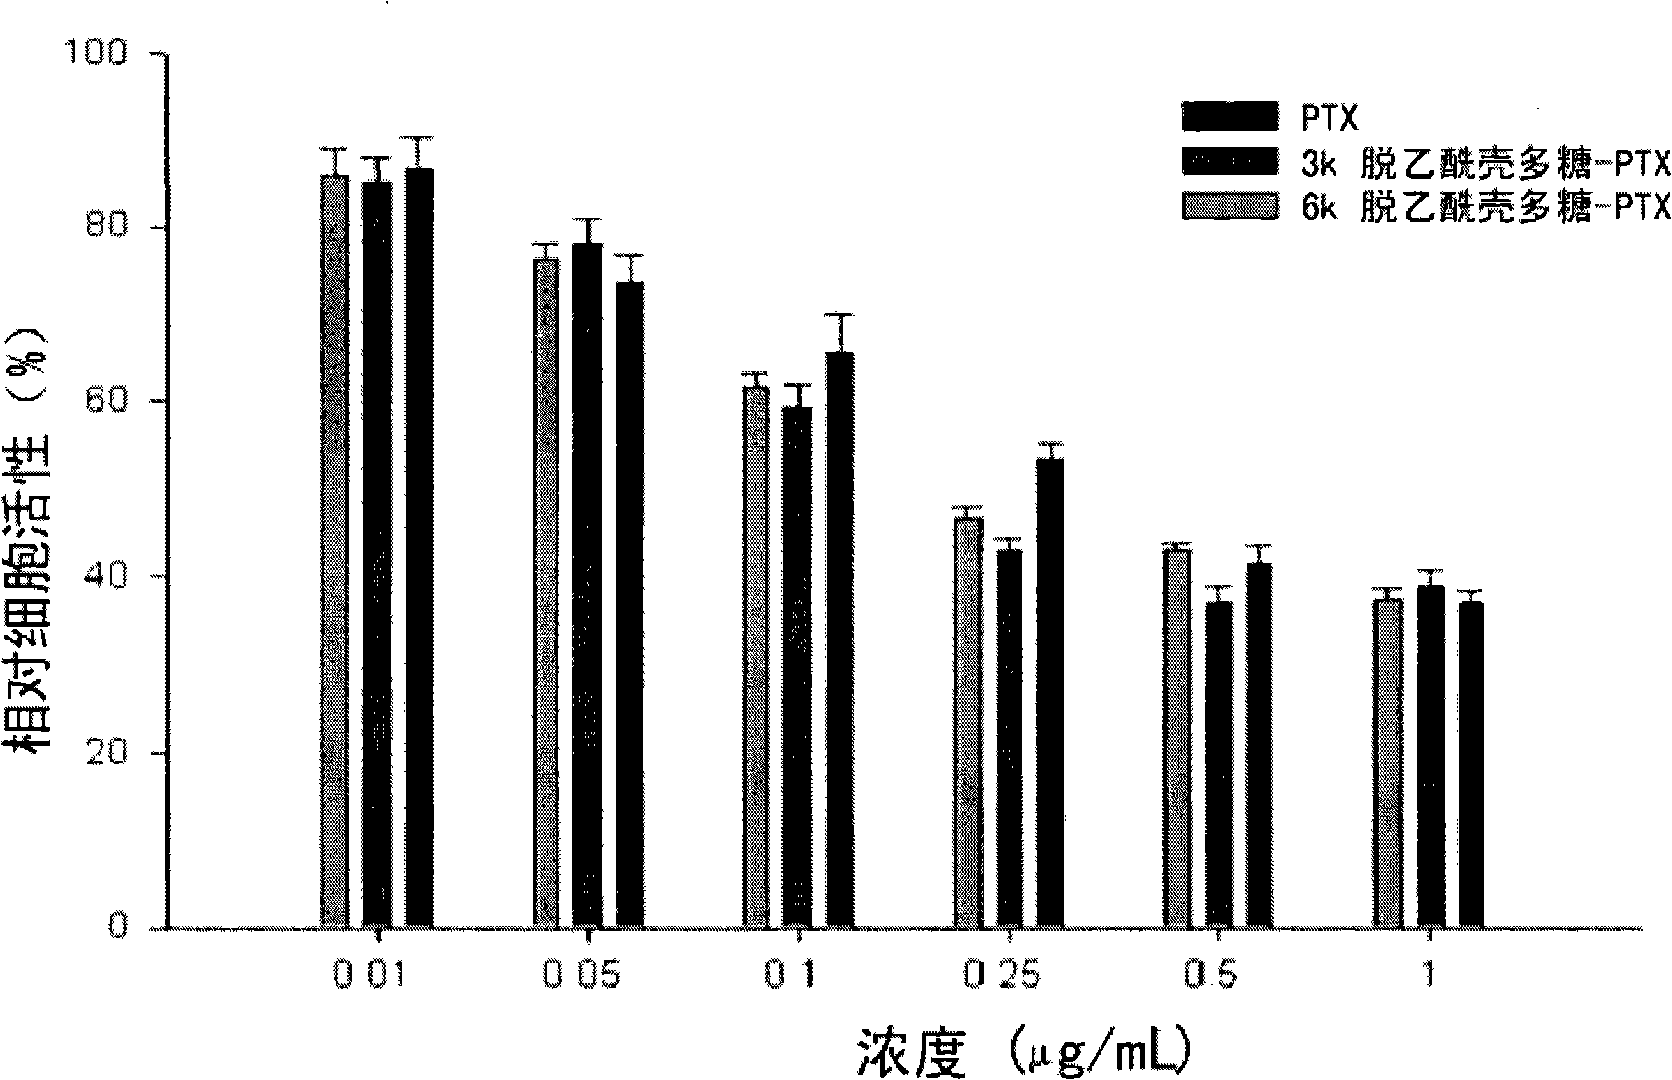 Conjugate comprising pharmaceutical active compound covalently bound to mucoadhesive polymer and transmucosal delivery method of pharmaceutical active compound using the same